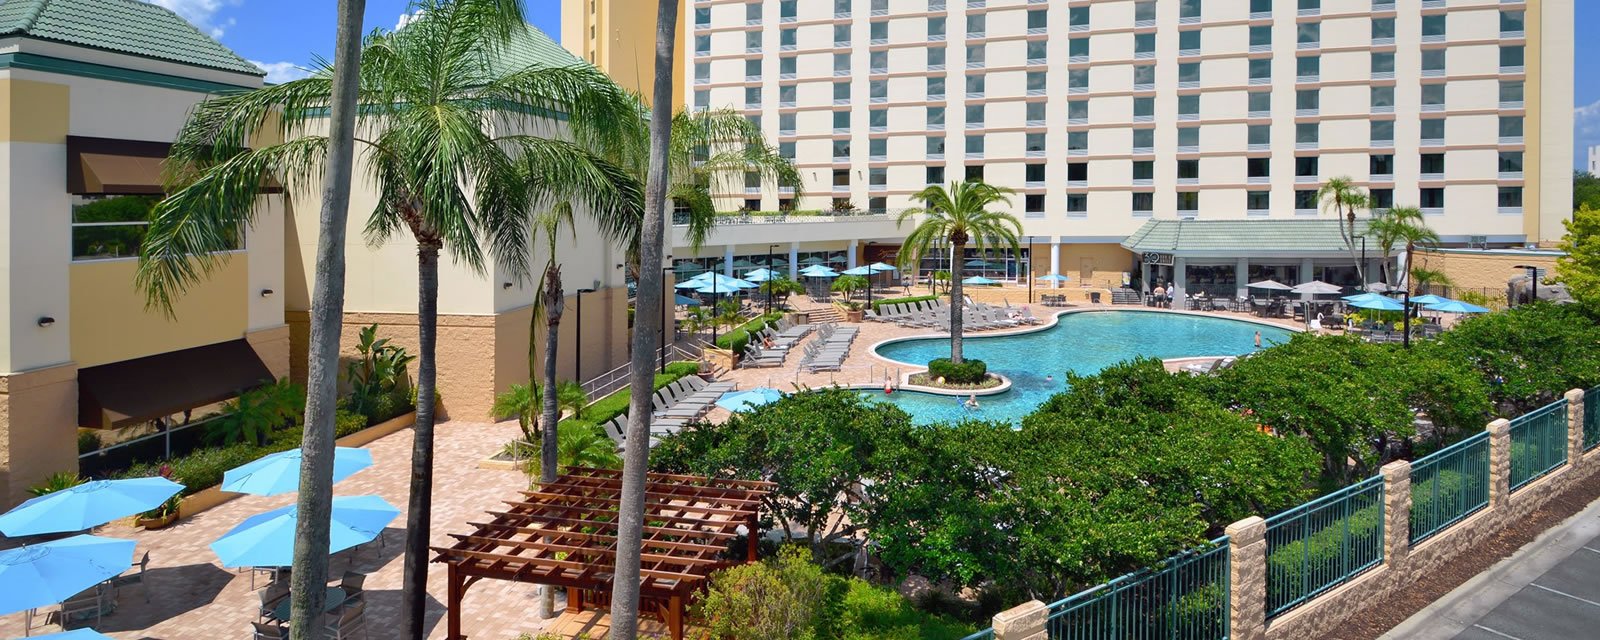 Pool with Rosen Plaza® Building Behind